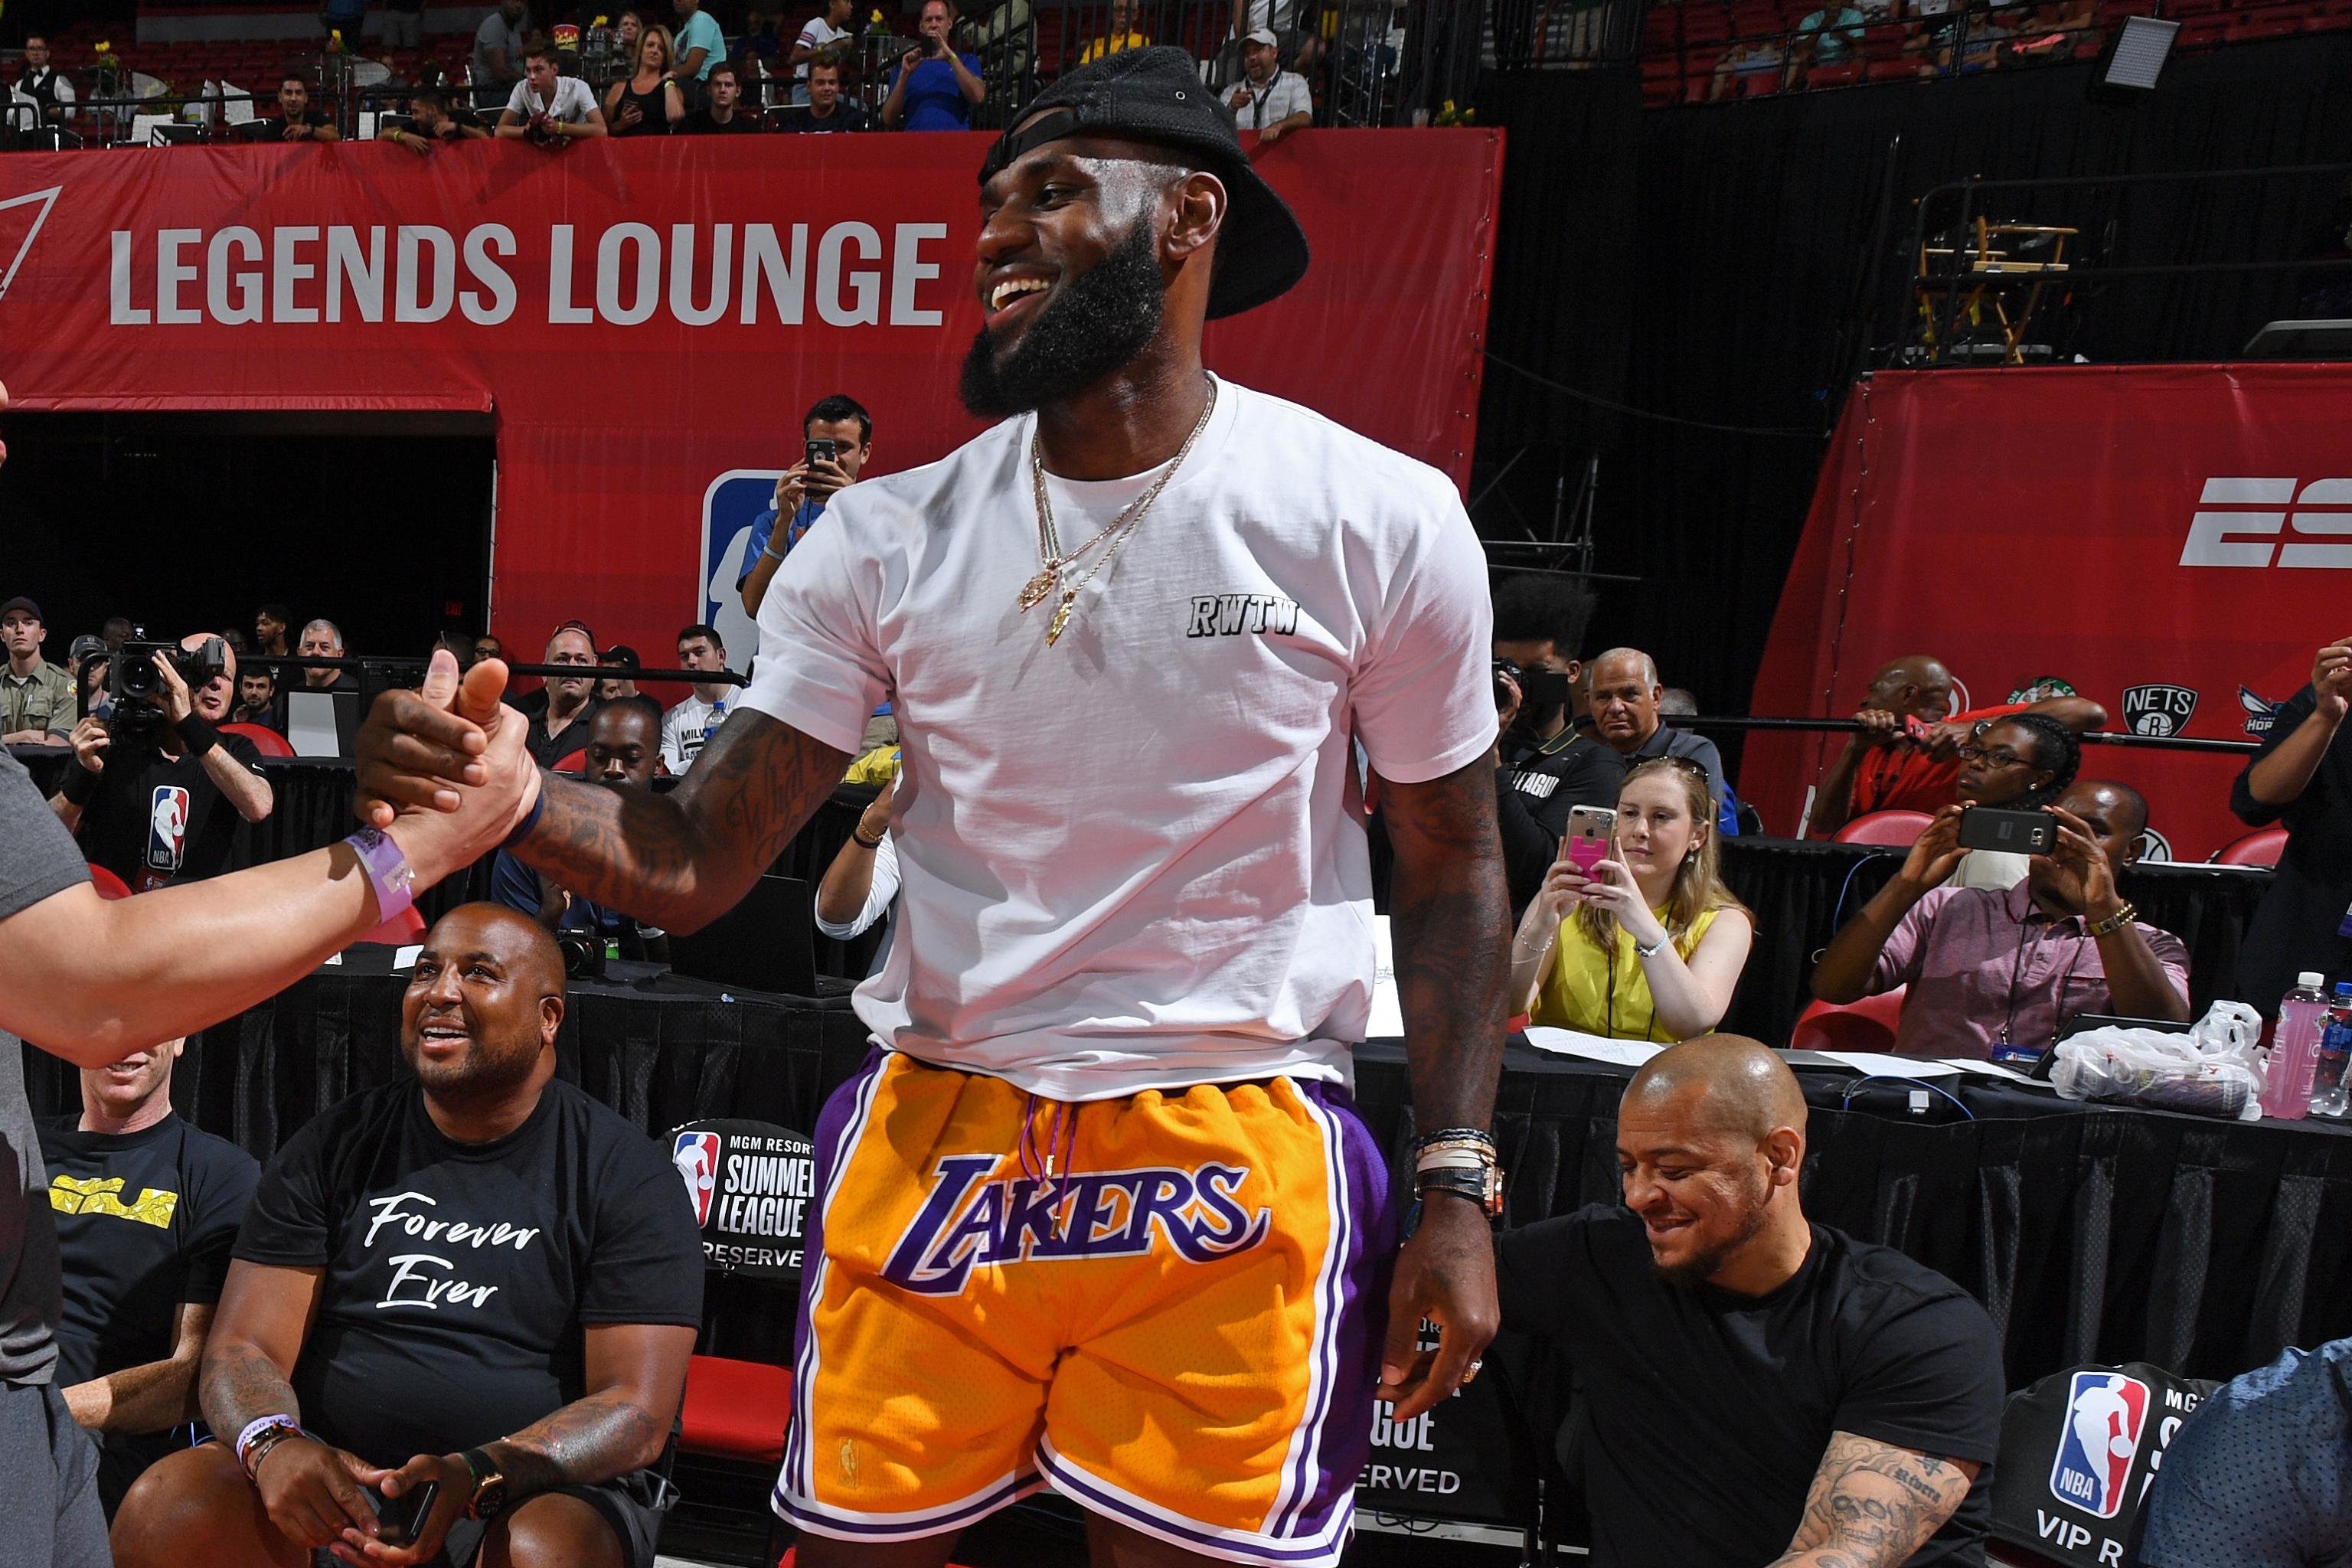 New Rumored Lakers Jerseys Leaked as Fans Go Crazy [LOOK]